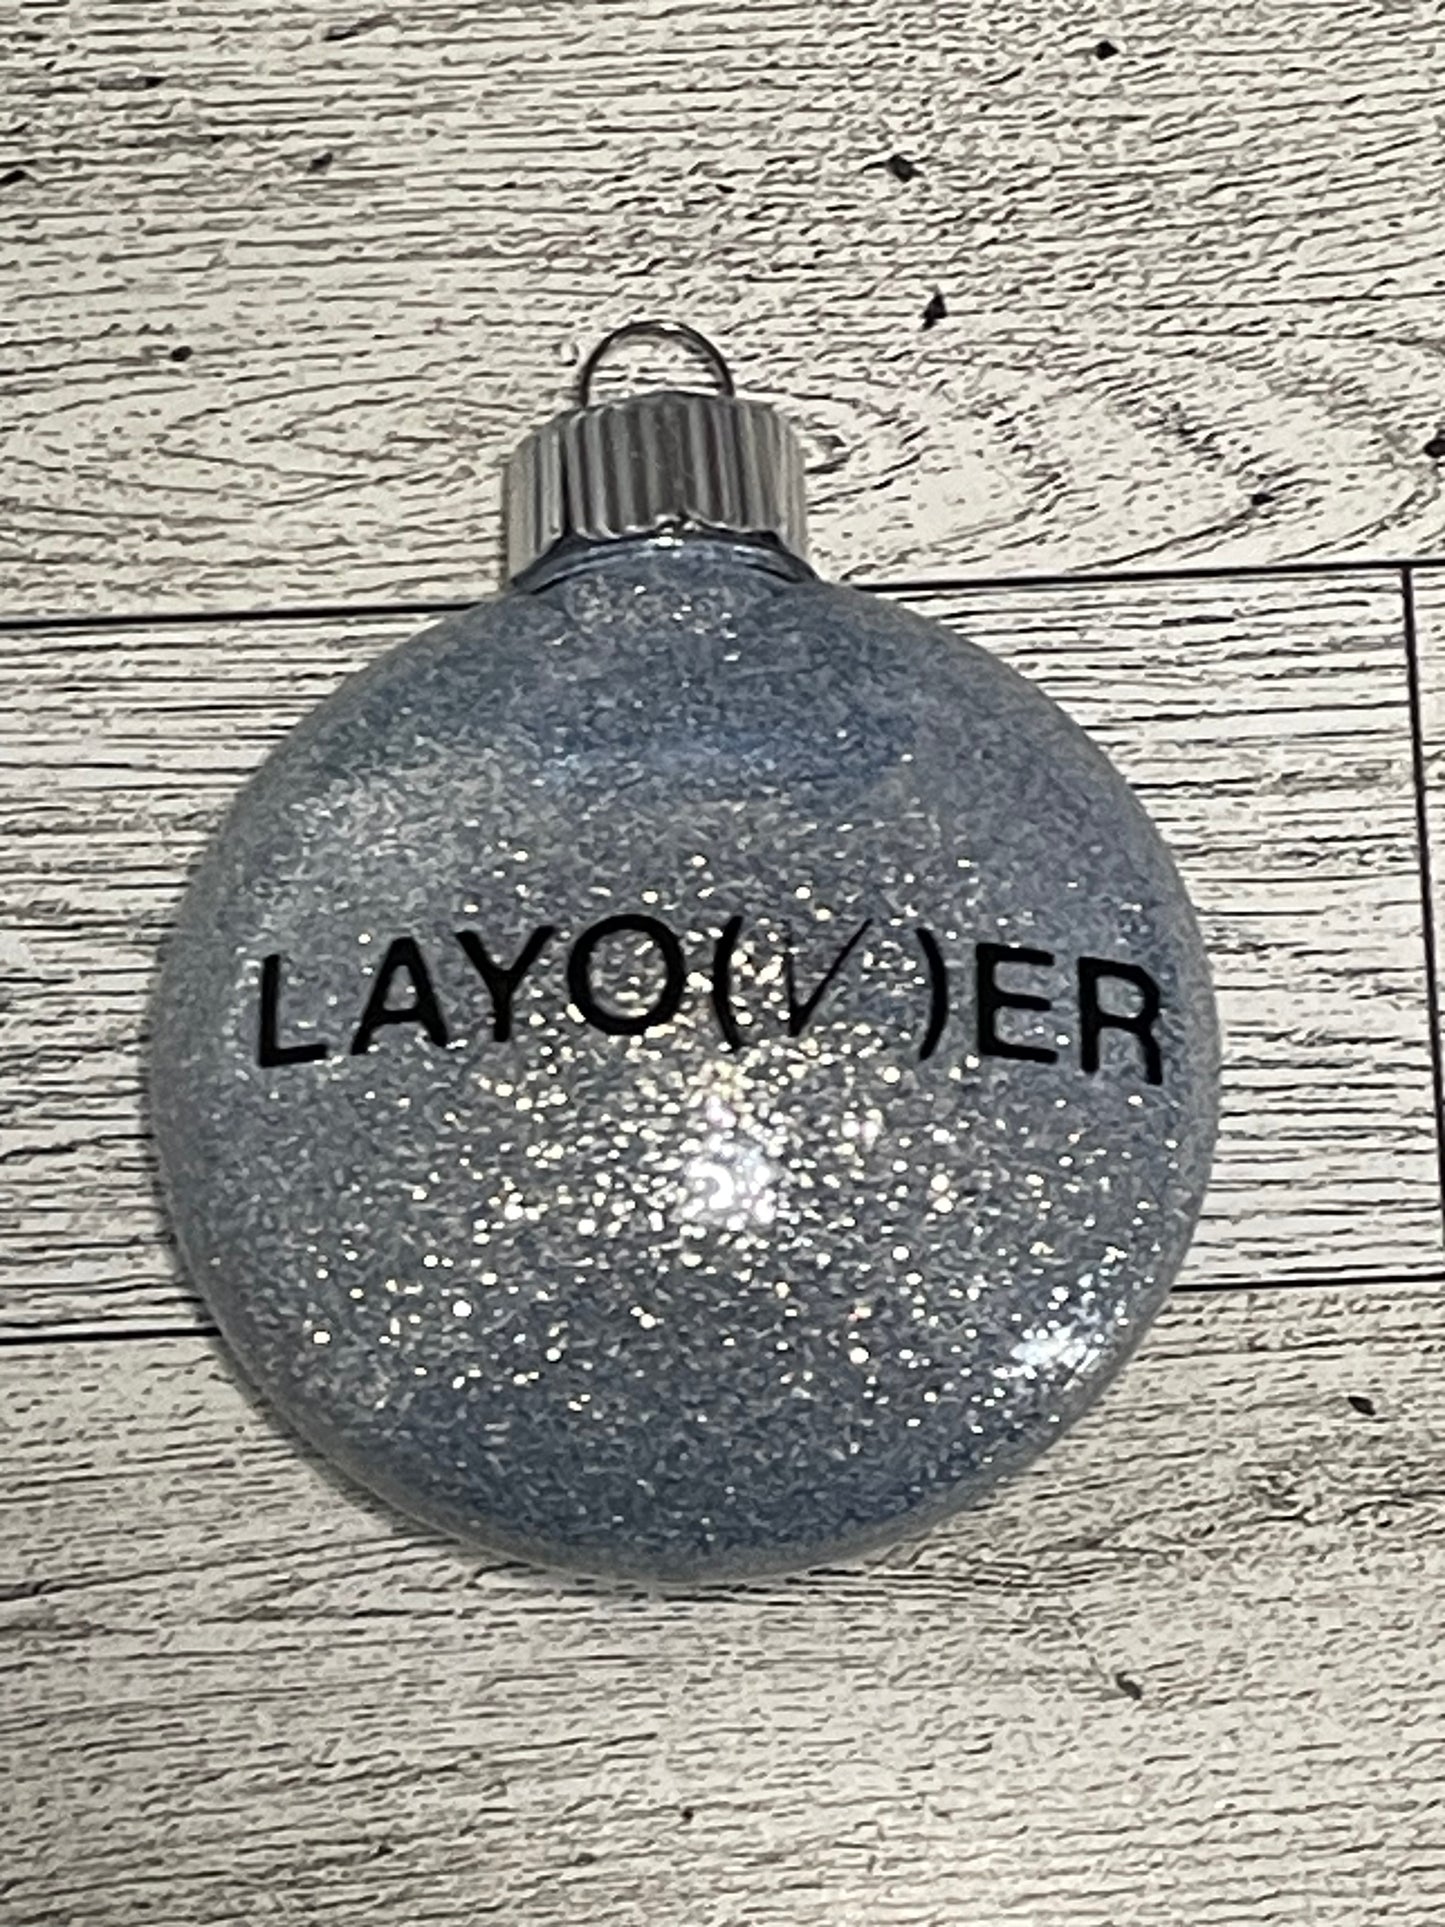 Layover inspired Ornament